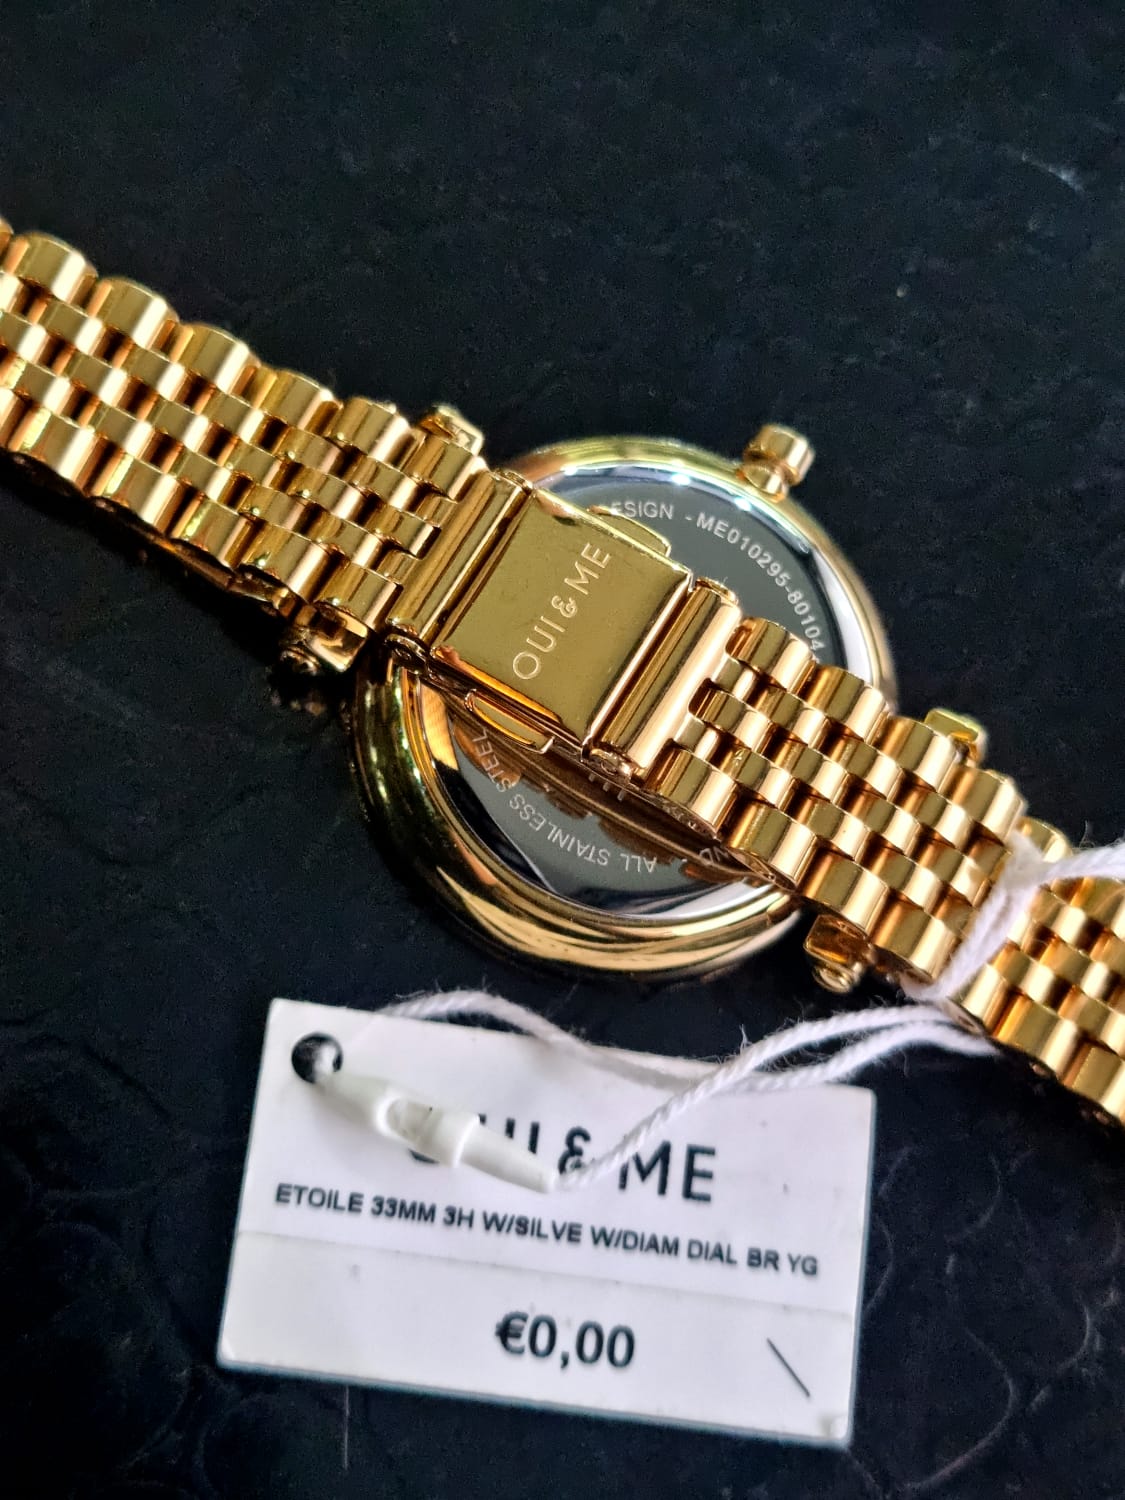 OUI And ME Ladies Watch Golden Color